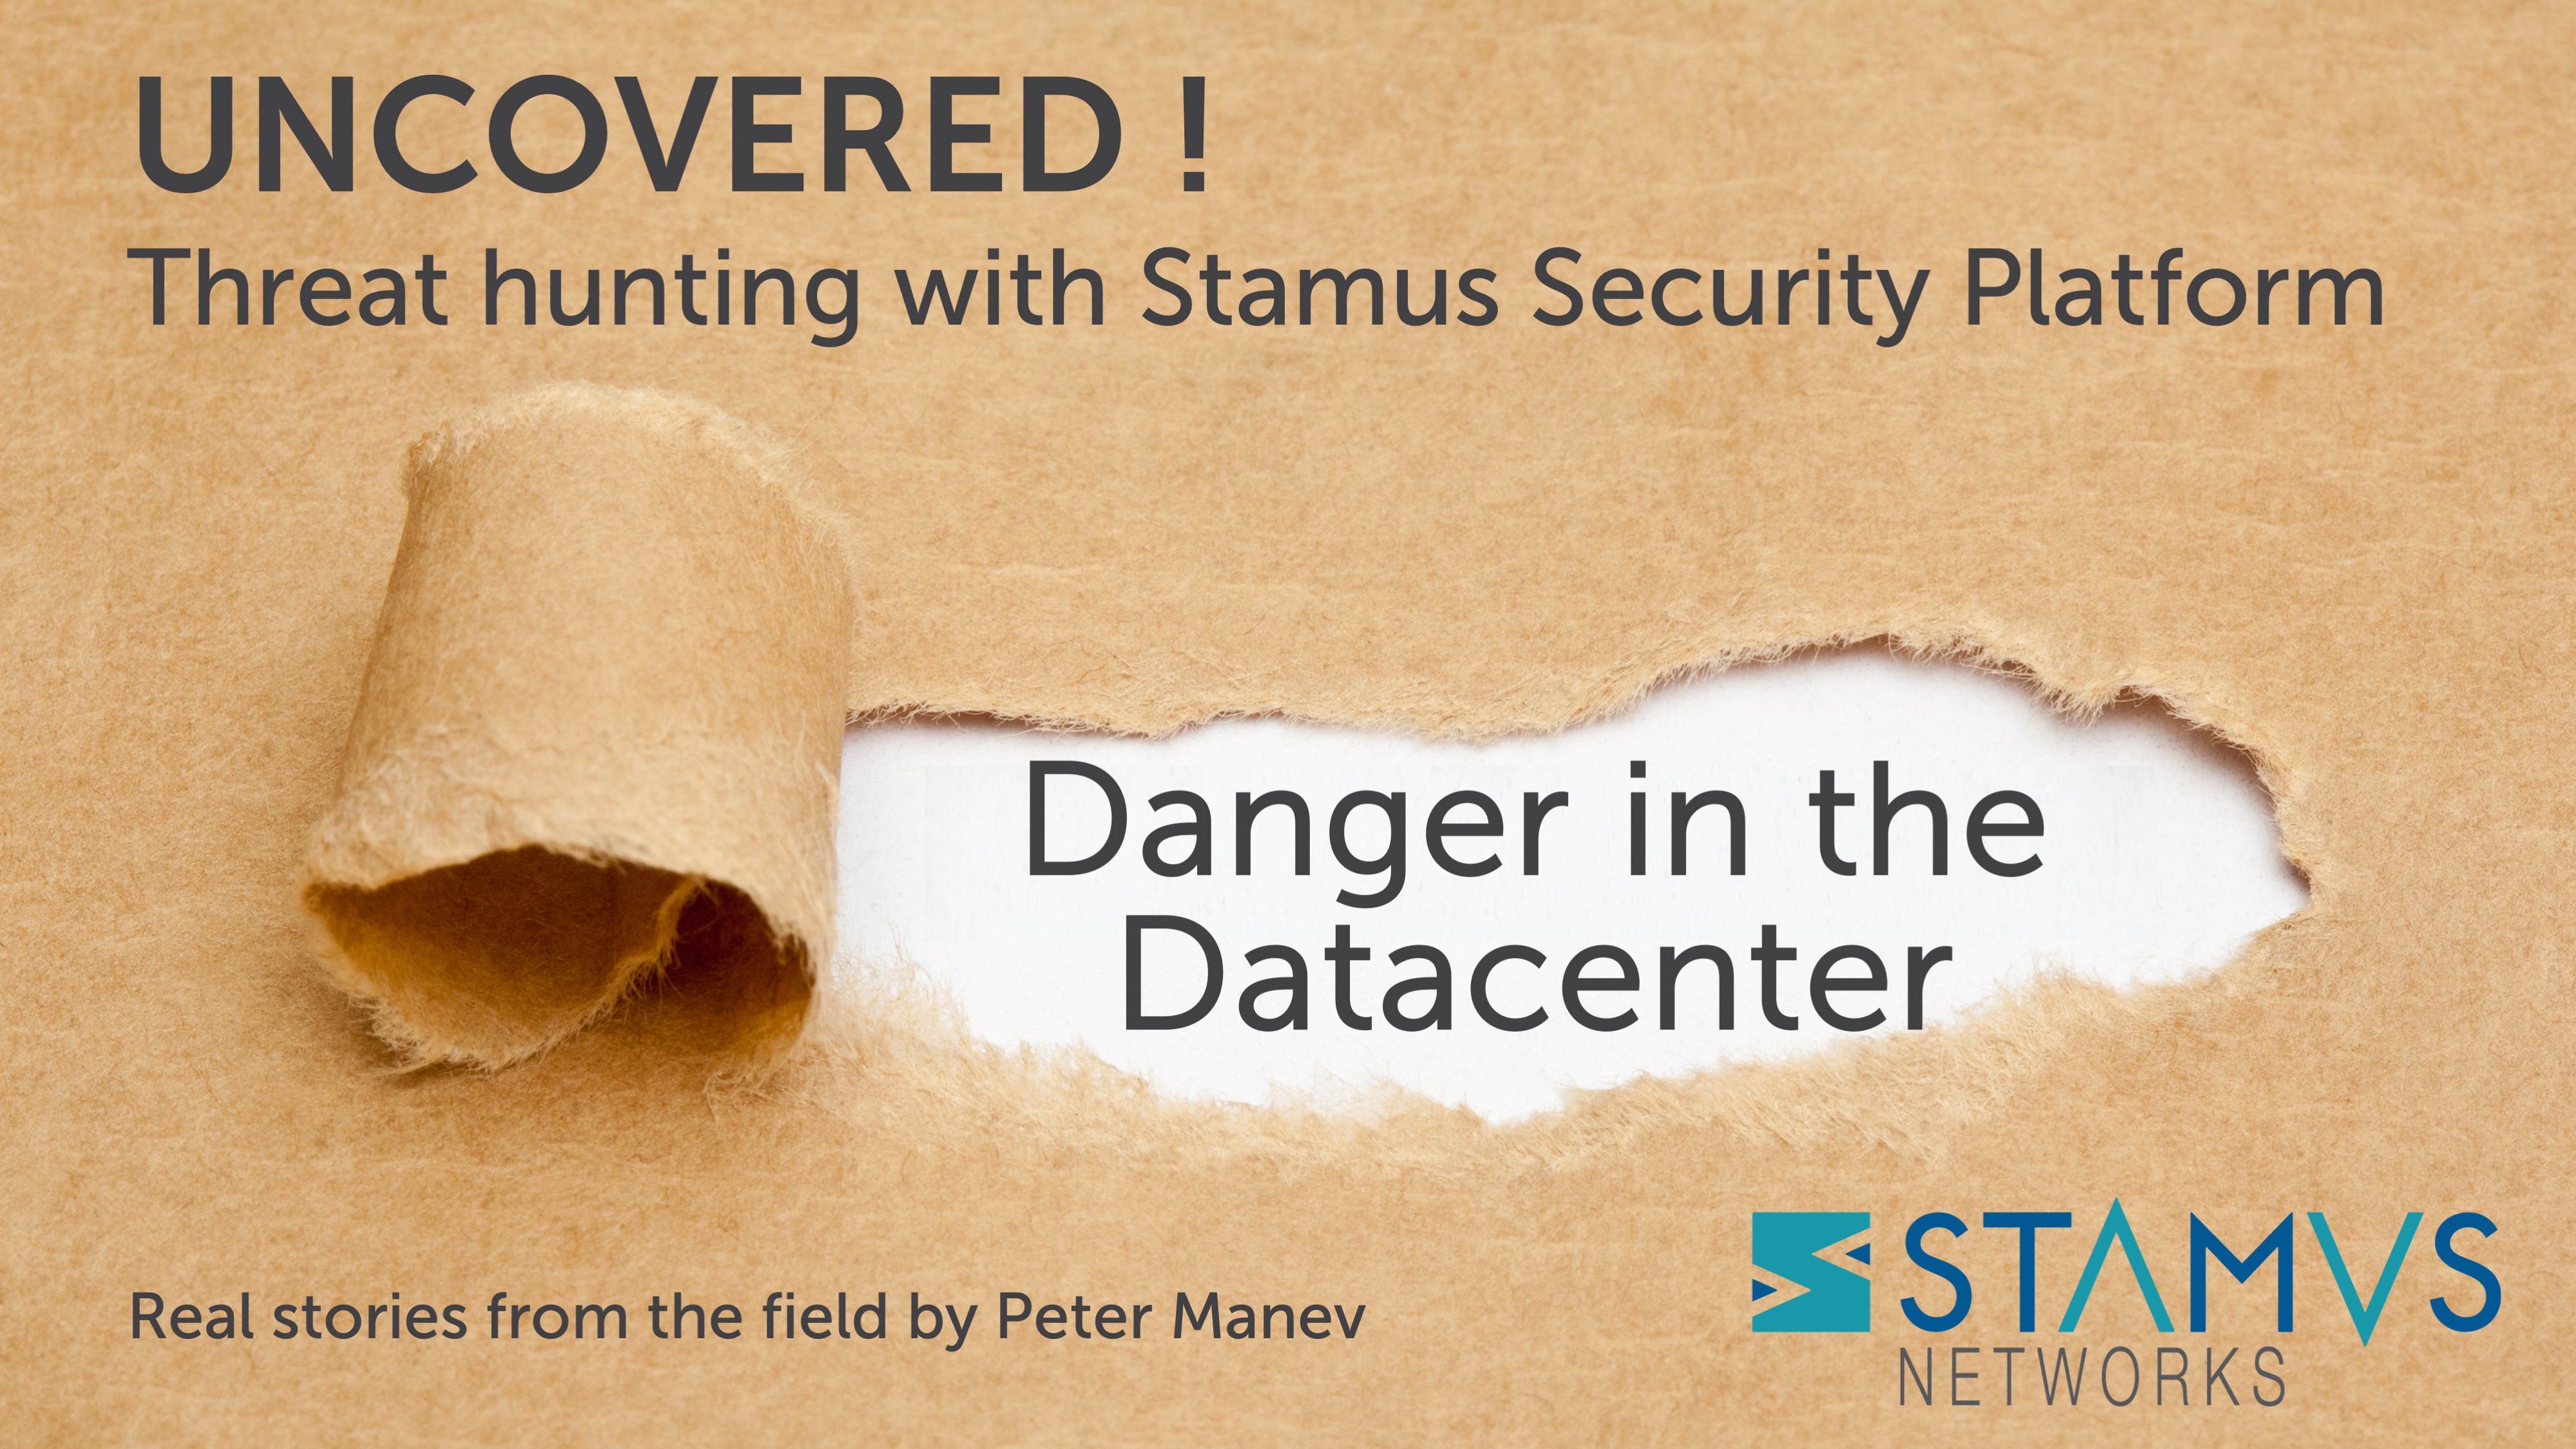 Threat Hunting with Stamus Security Platform: Danger in the Datacenter